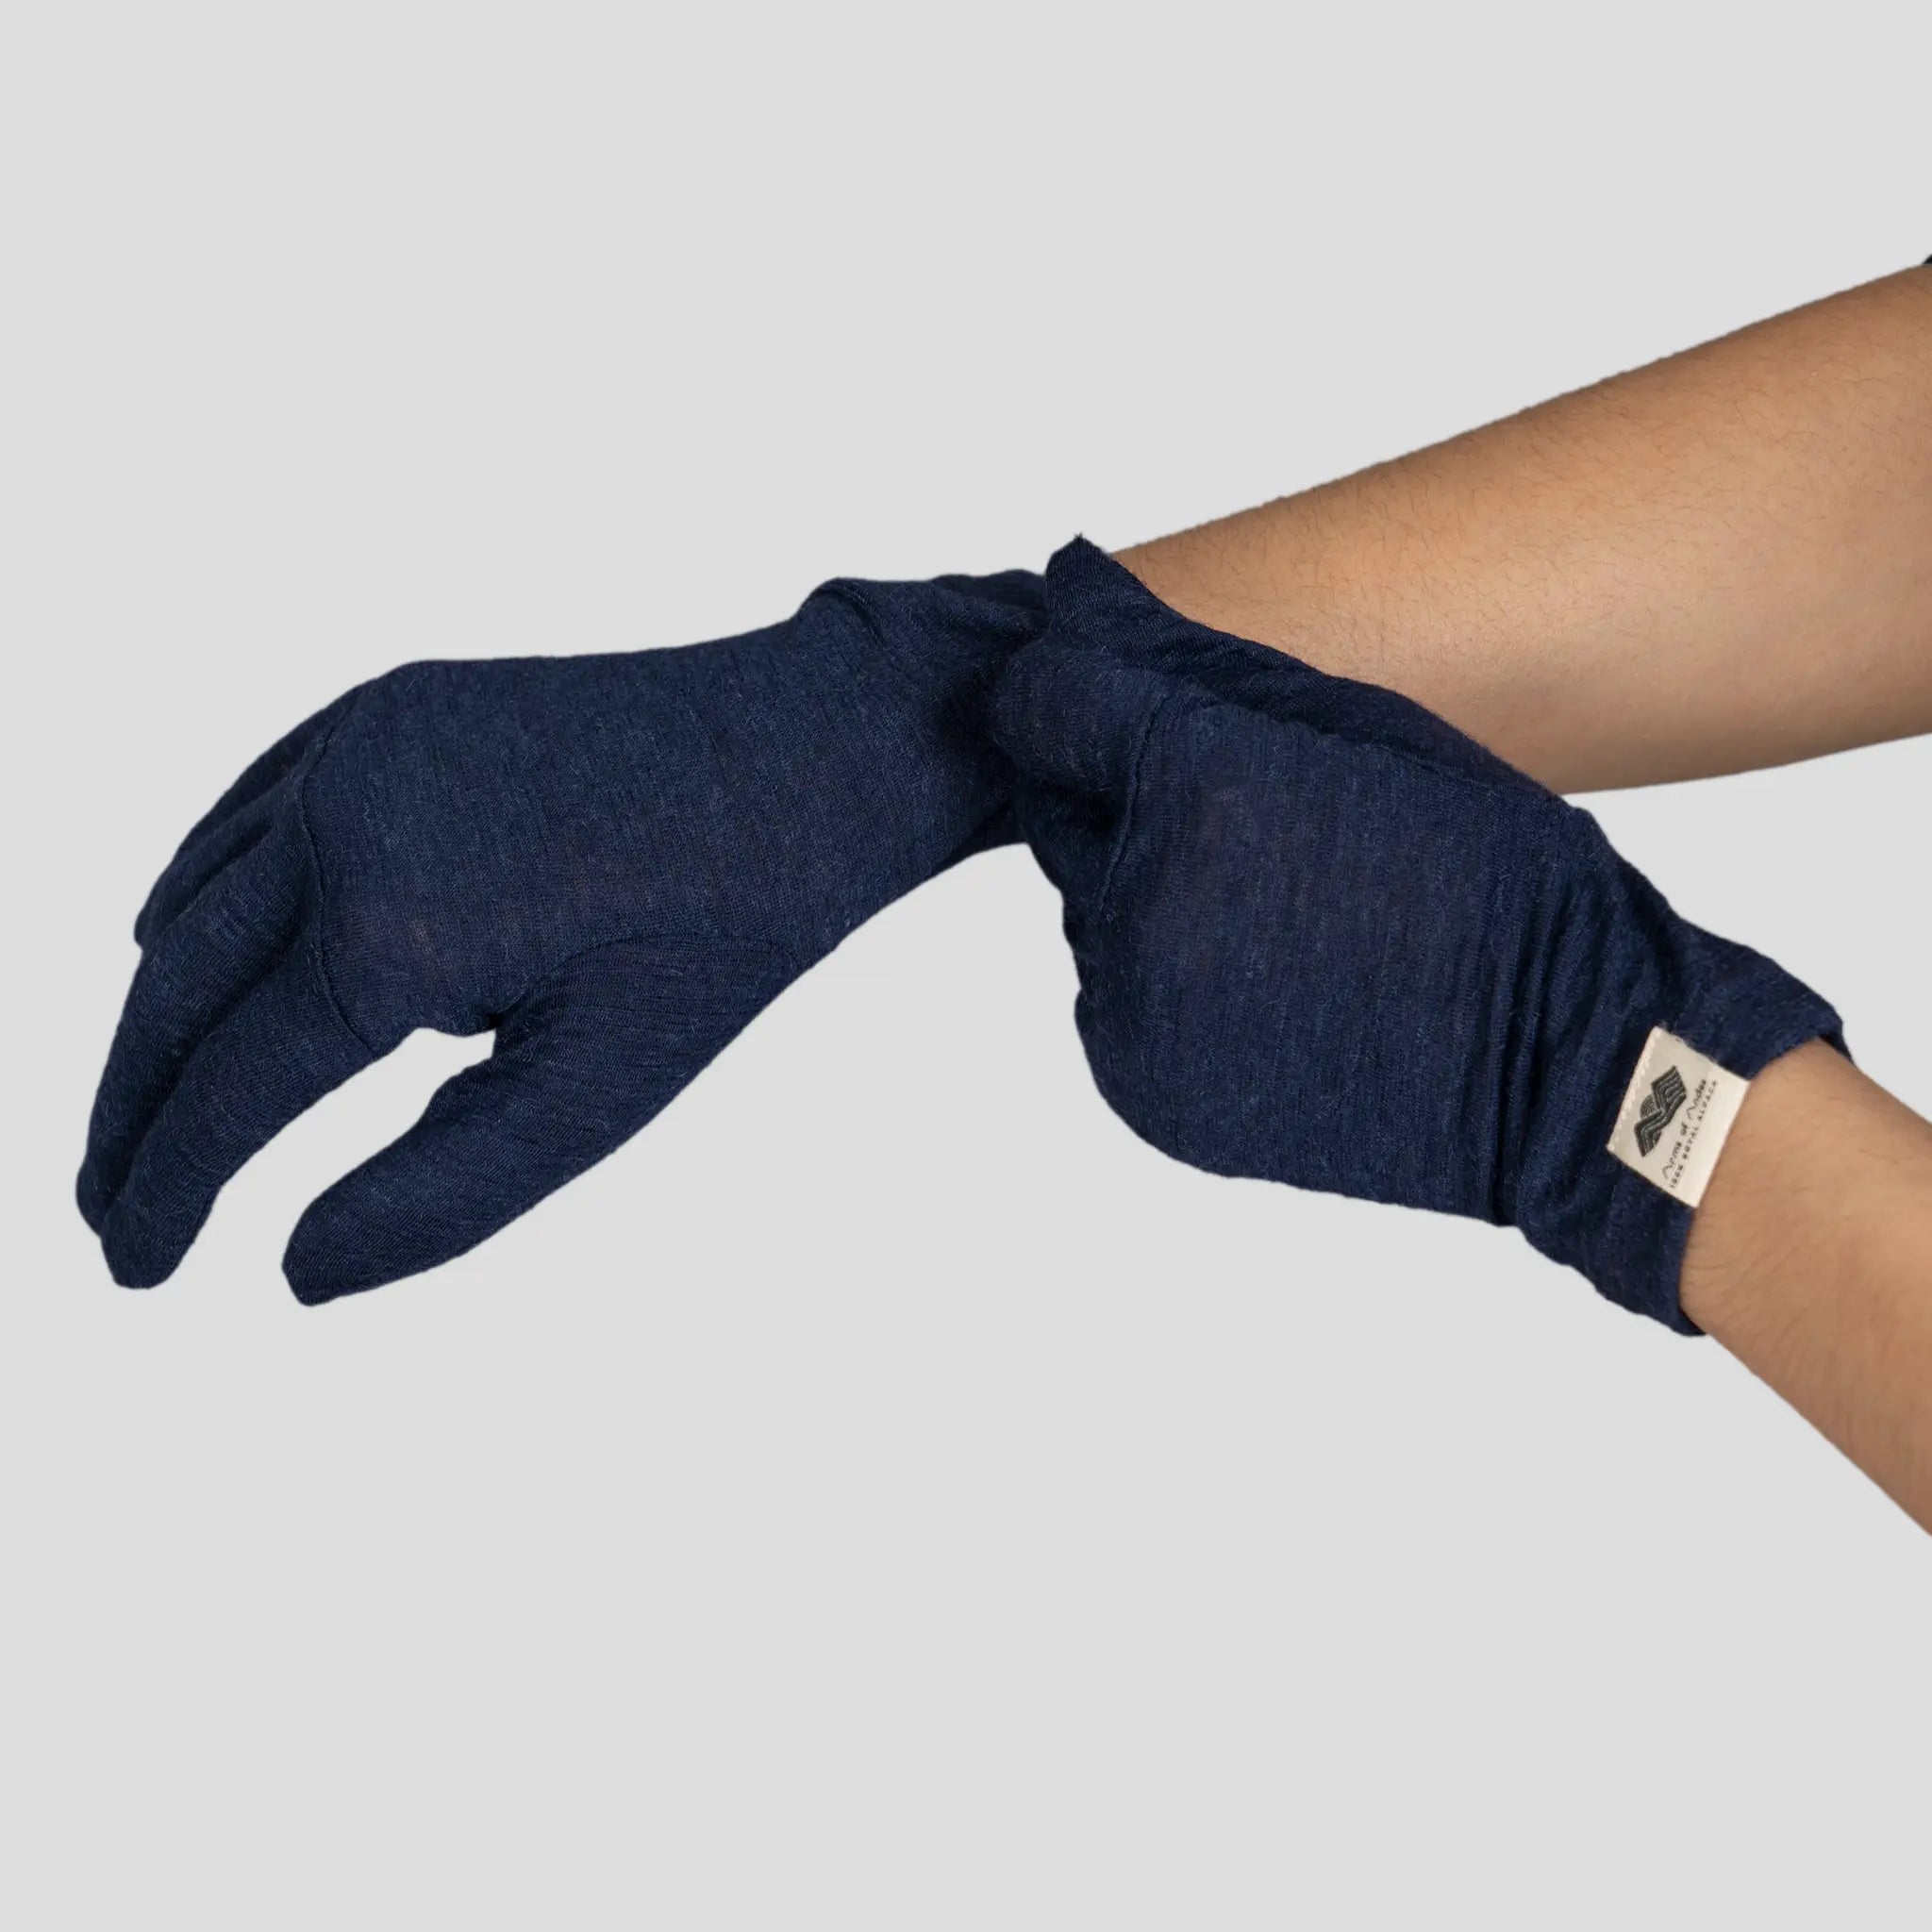 Unisex Alpaca Wool Glove Liners: 160 Ultralight color Natural Gray